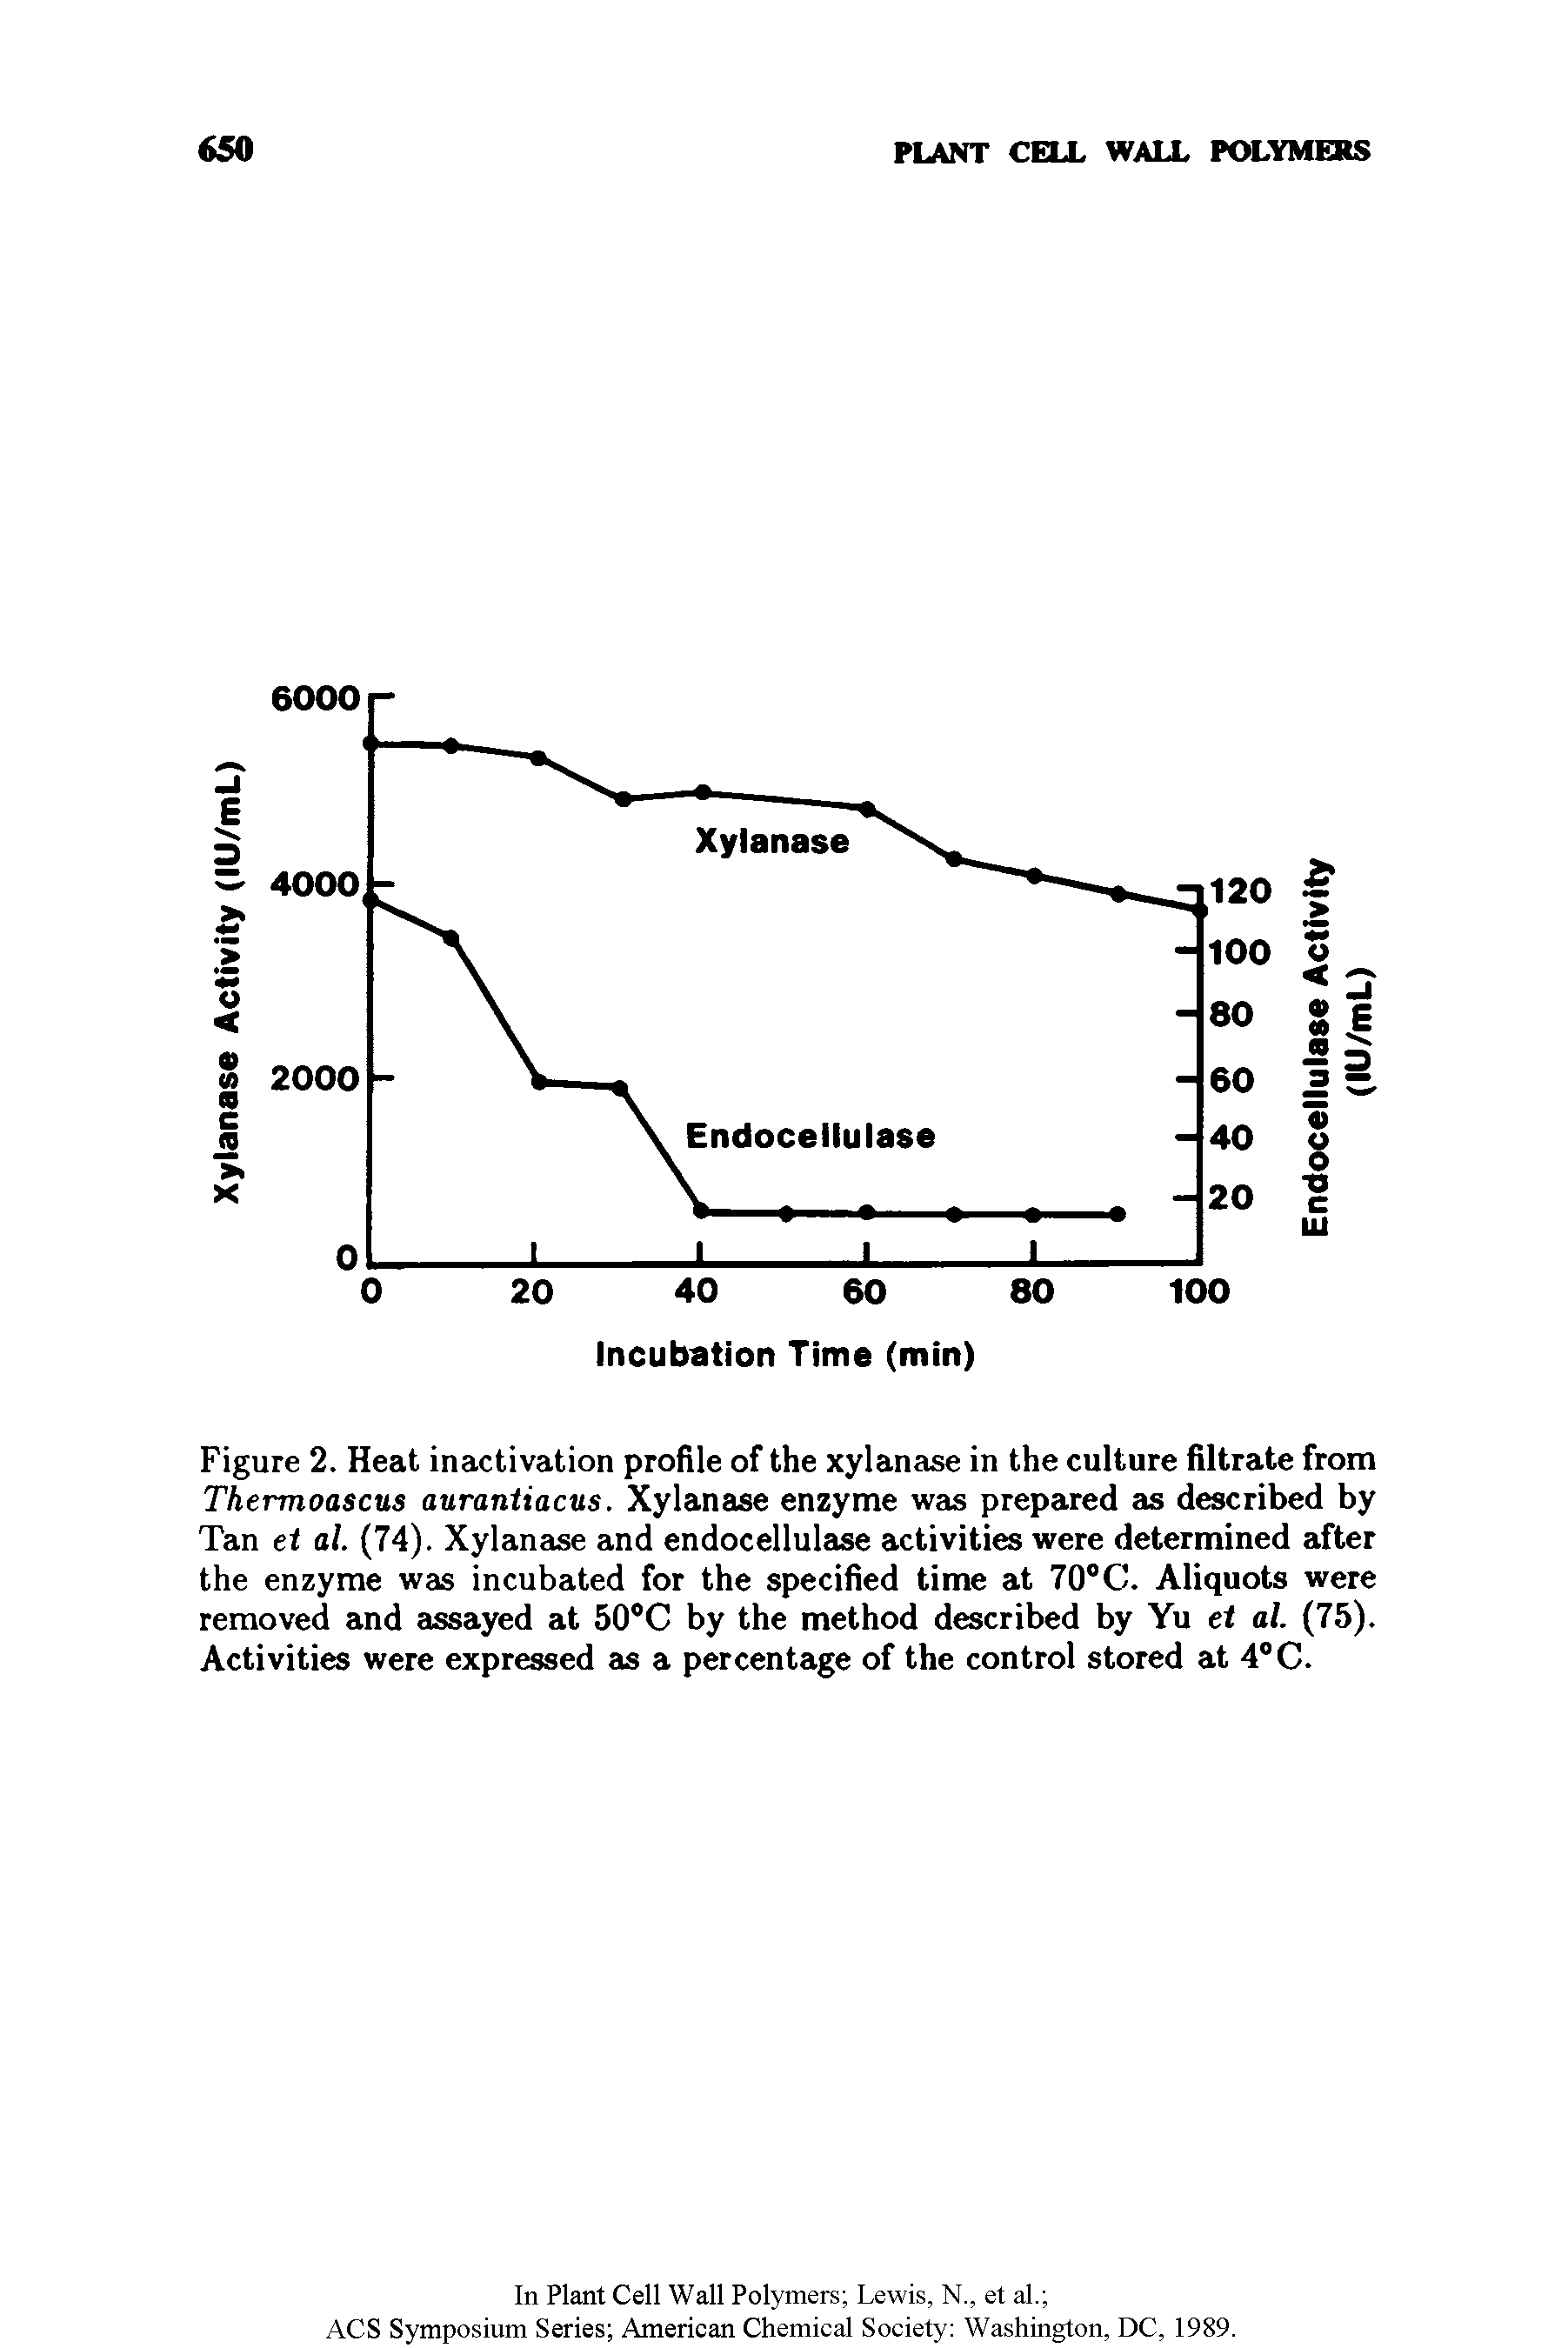 Figure 2. Heat inactivation profile of the xylanase in the culture filtrate from Thermoascus aurantiacus. Xylanase enzyme was prepared as described by Tan et al. (74). Xylanase and endocellulase activities were determined after the enzyme was incubated for the specified time at 70°C. Aliquots were removed and assayed at 50°C by the method described by Yu et al. (75). Activities were expressed as a percentage of the control stored at 4°C.